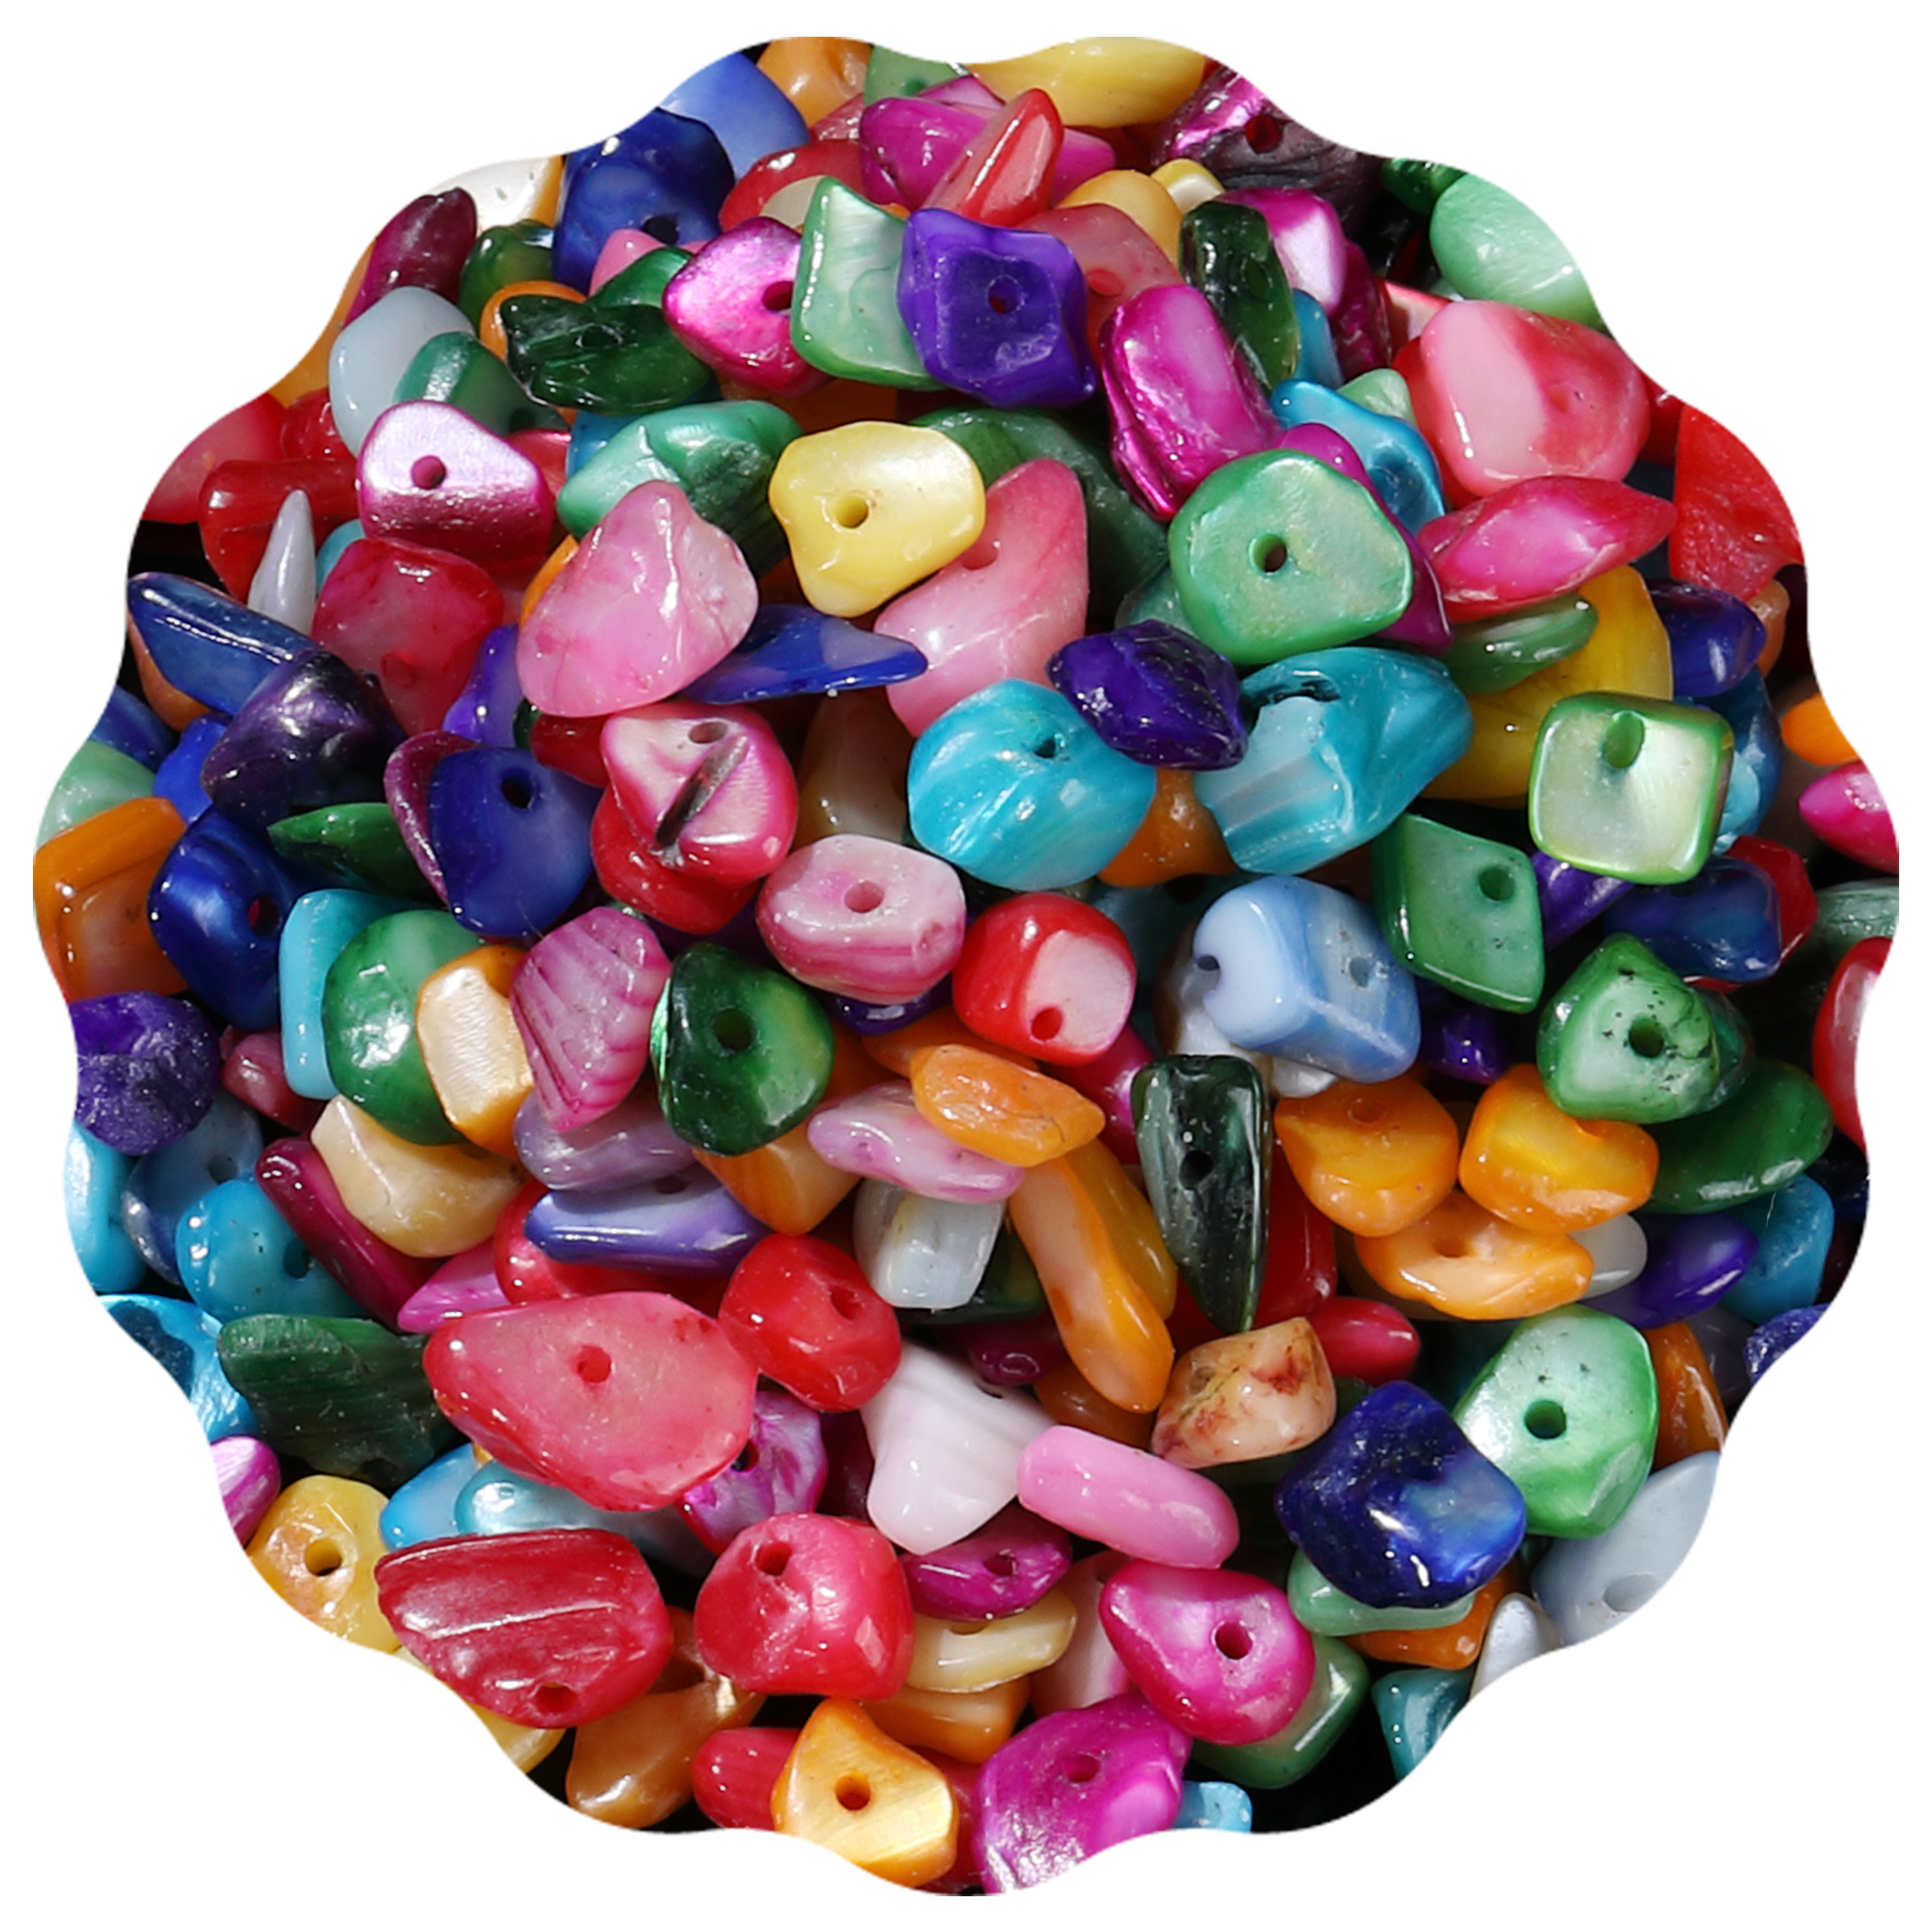 Natural Chip Stone Beads for Jewelry Making, Irregular Gemstone Loose Beads Crushed Chunked Crystal Pieces Rock Beads Hole Drilled for DIY Art